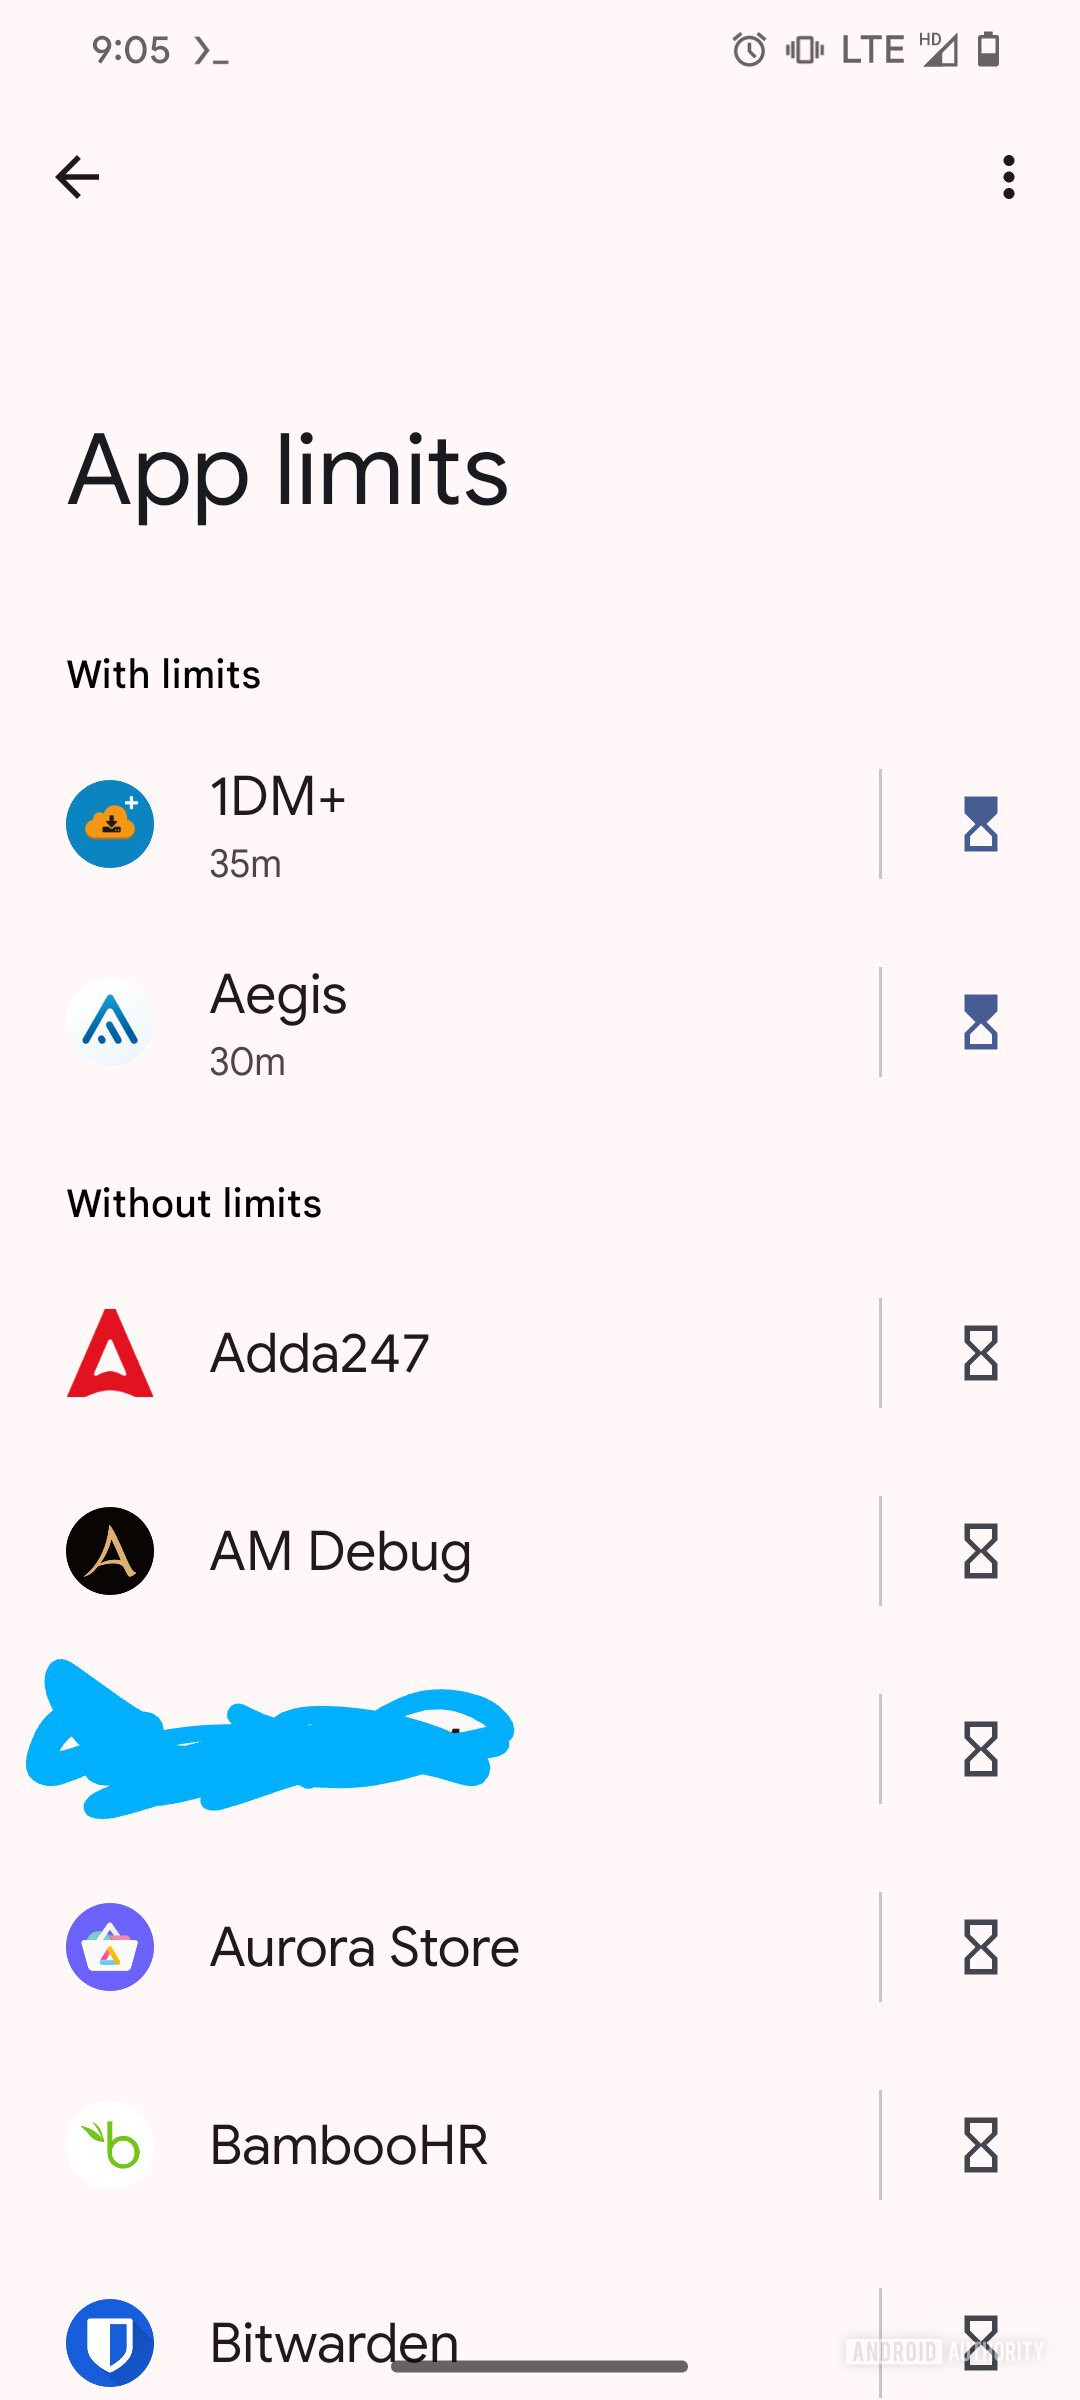 New Digital Wellbeing app limits sections